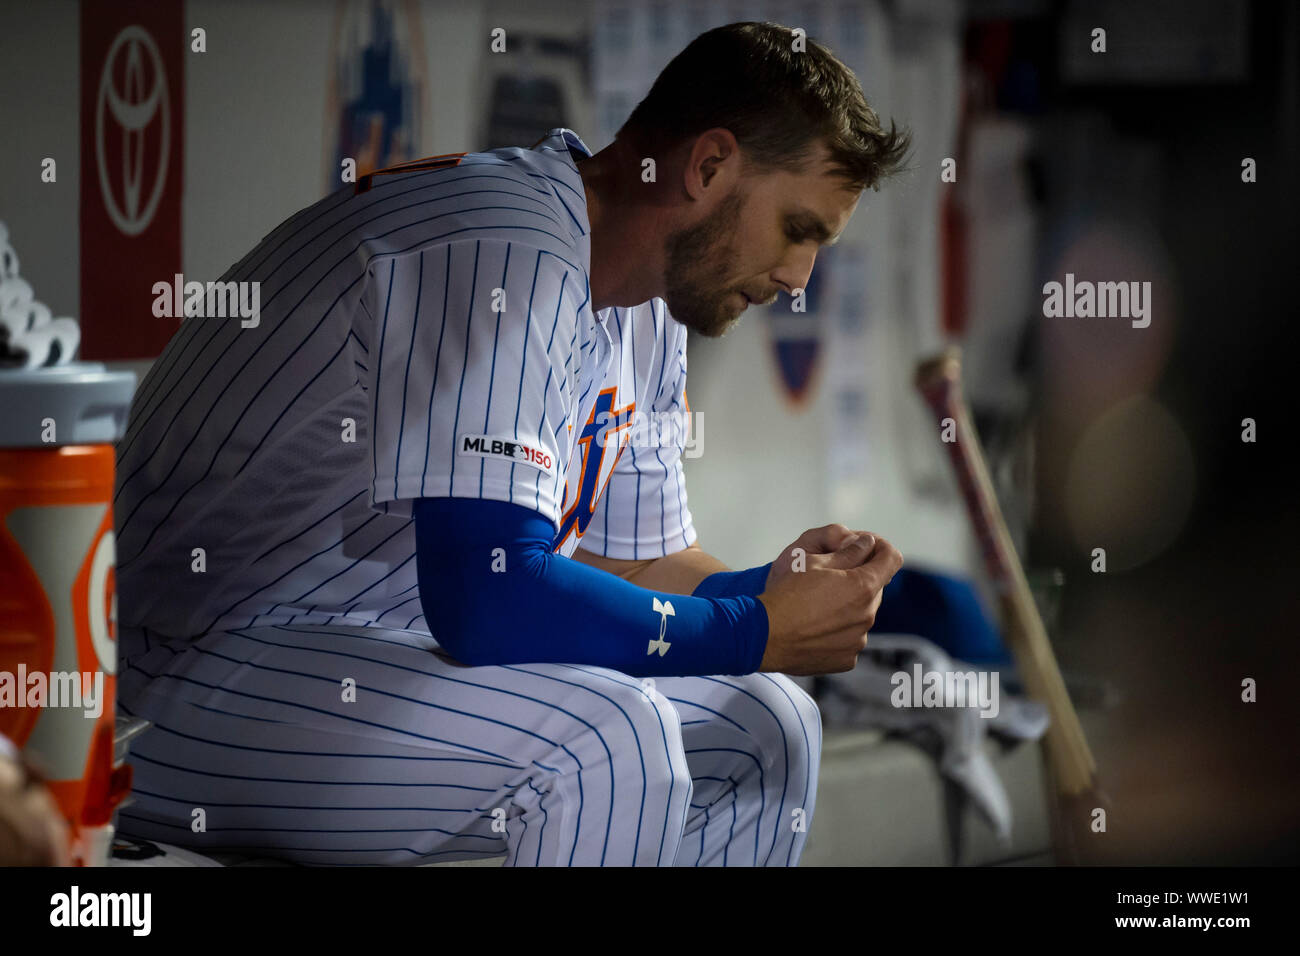 Queens, New York, USA. 13th Sep, 2019. New York Mets left fielder Jeff McNeil (6) sits on the bench in the dugout during the game between The New York Mets and The Los Angeles Dodgers at Citi Field in Queens, New York. Mandatory credit: Kostas Lymperopoulos/CSM/Alamy Live News Stock Photo